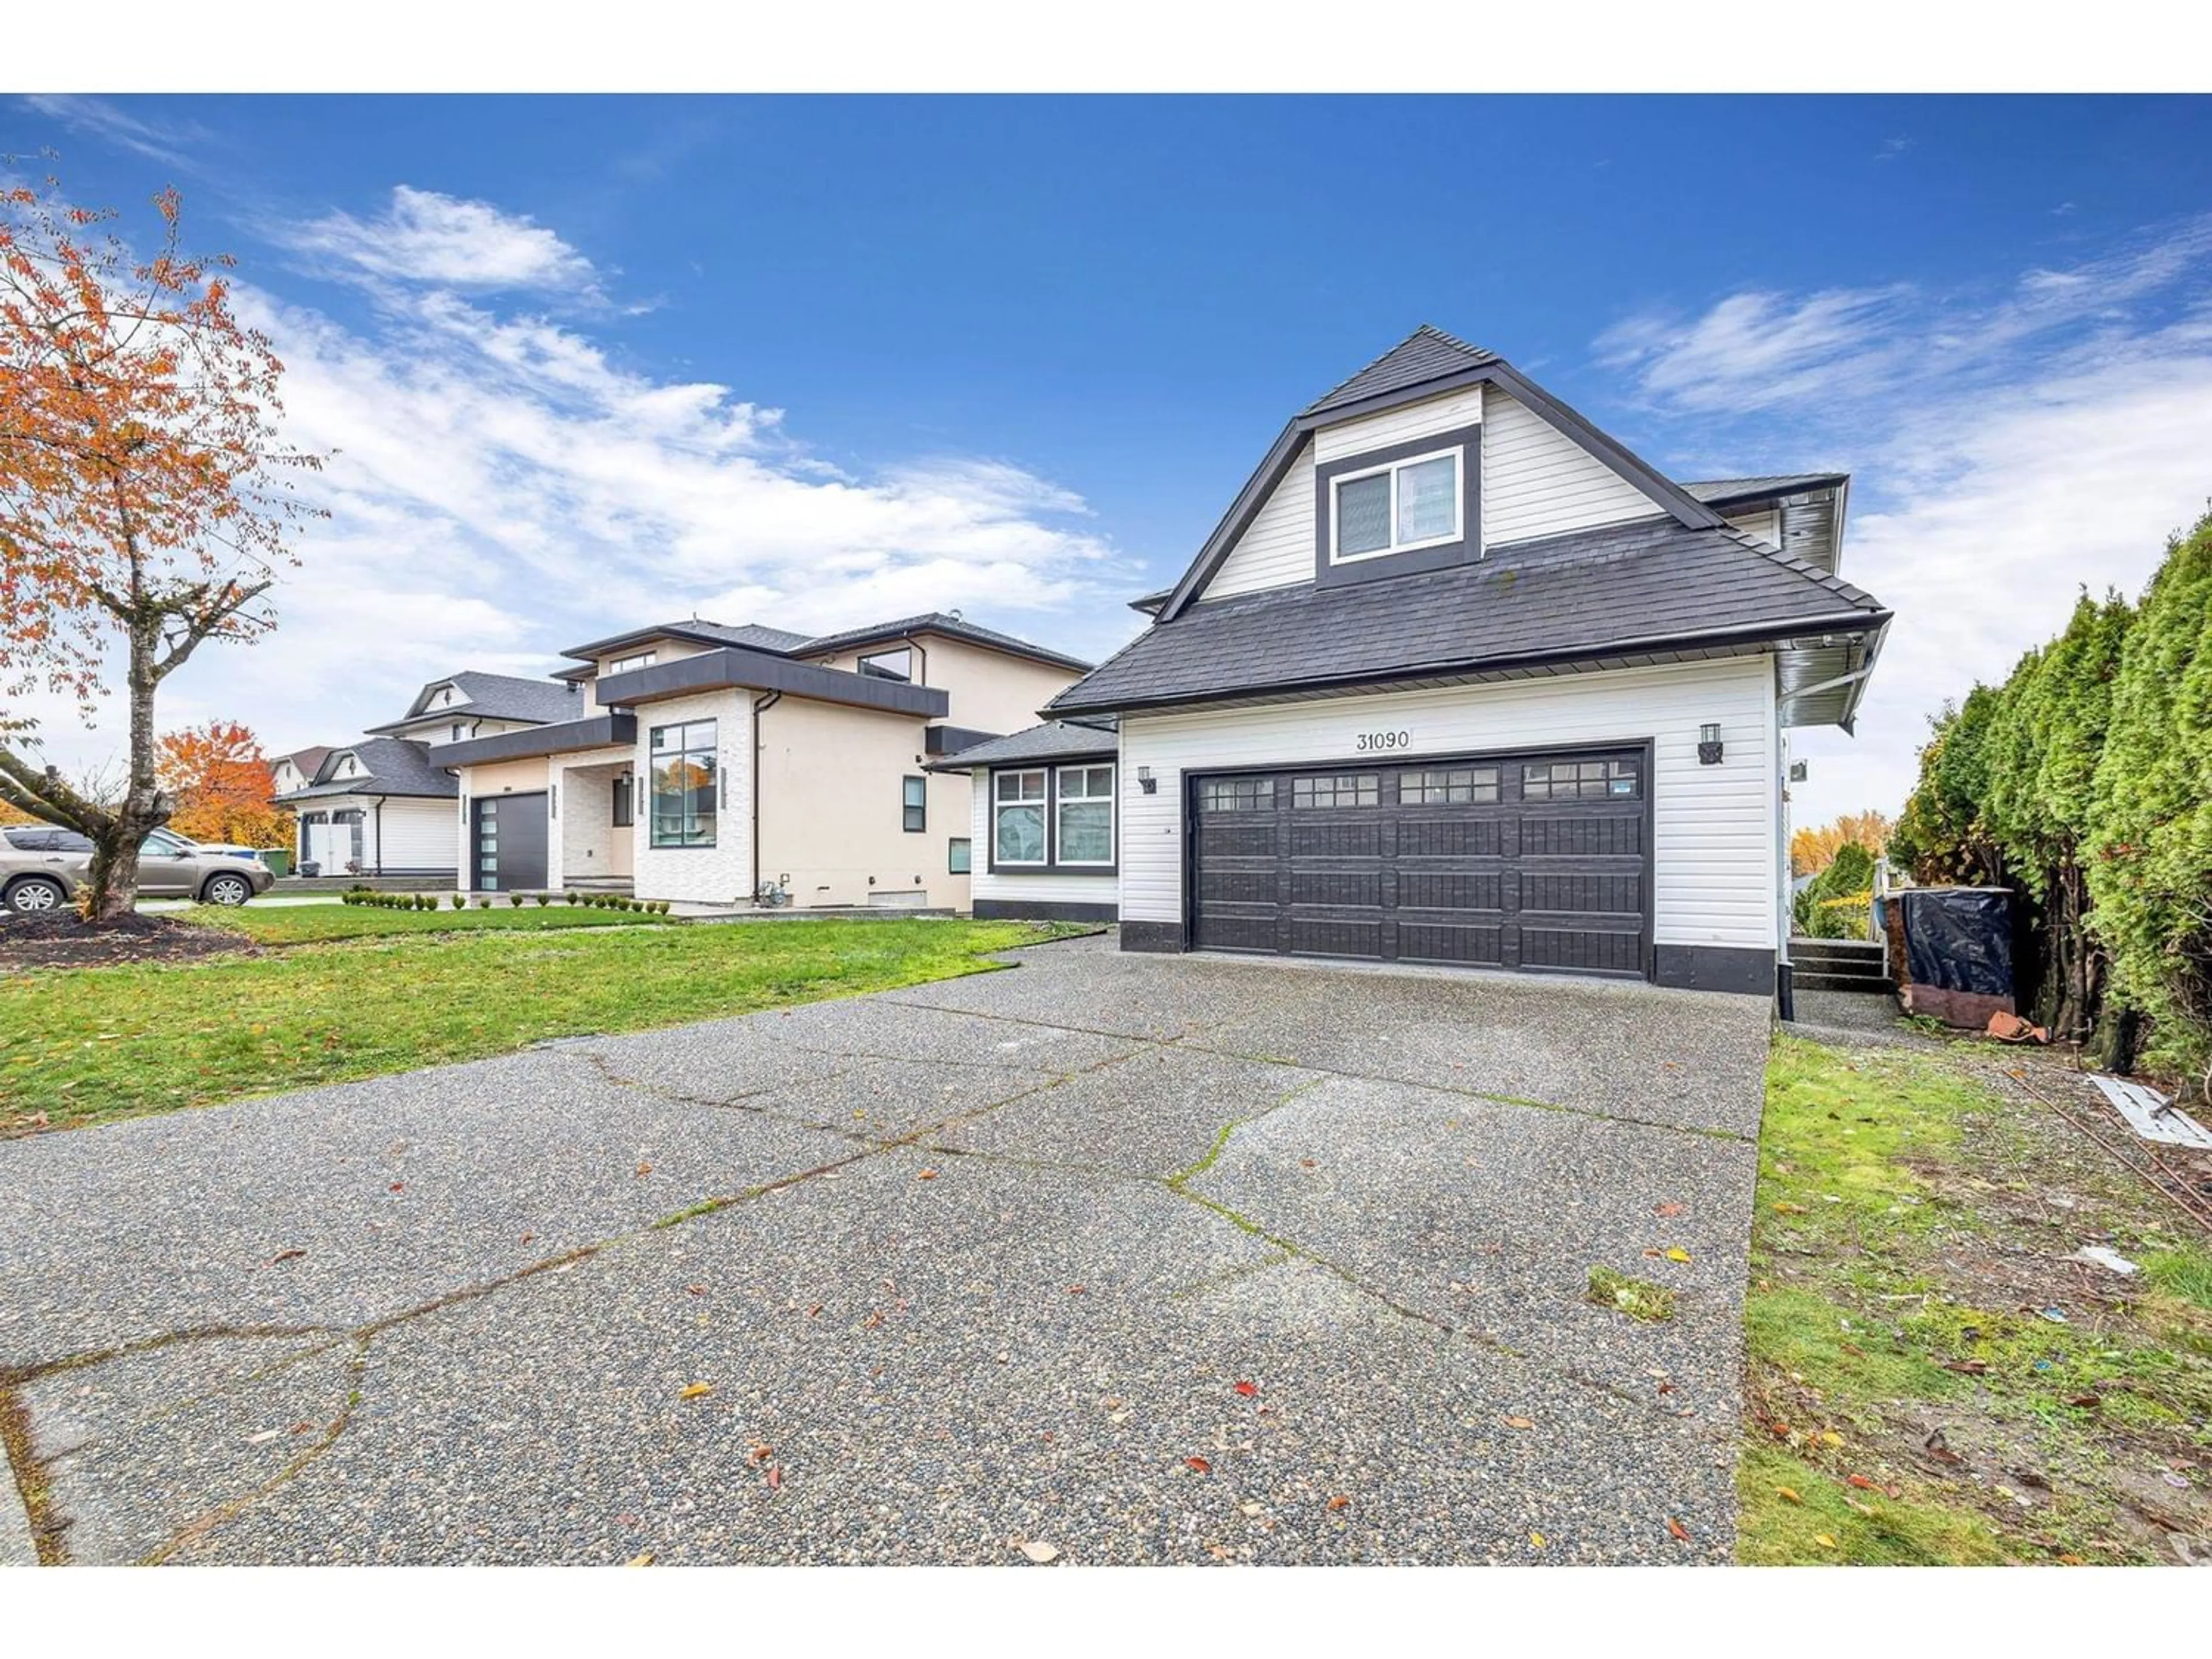 Frontside or backside of a home for 31090 SIDONI AVENUE, Abbotsford British Columbia V2T5K1